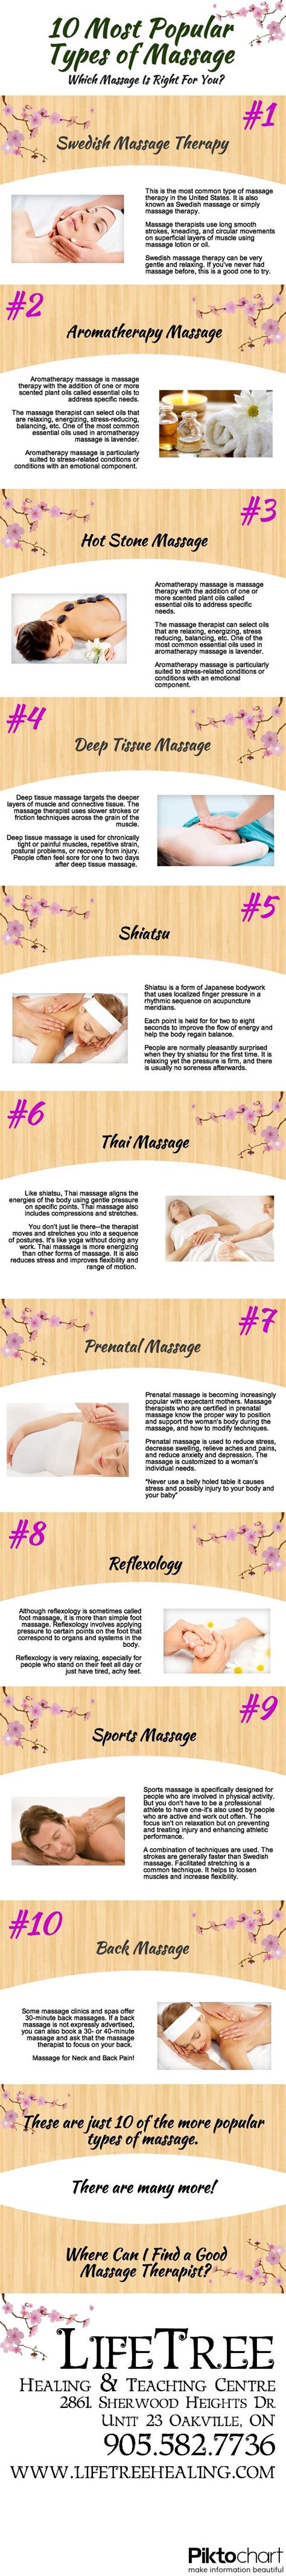 Lifetree Healing And Teaching Centre Massage Therapy Types Of Massage